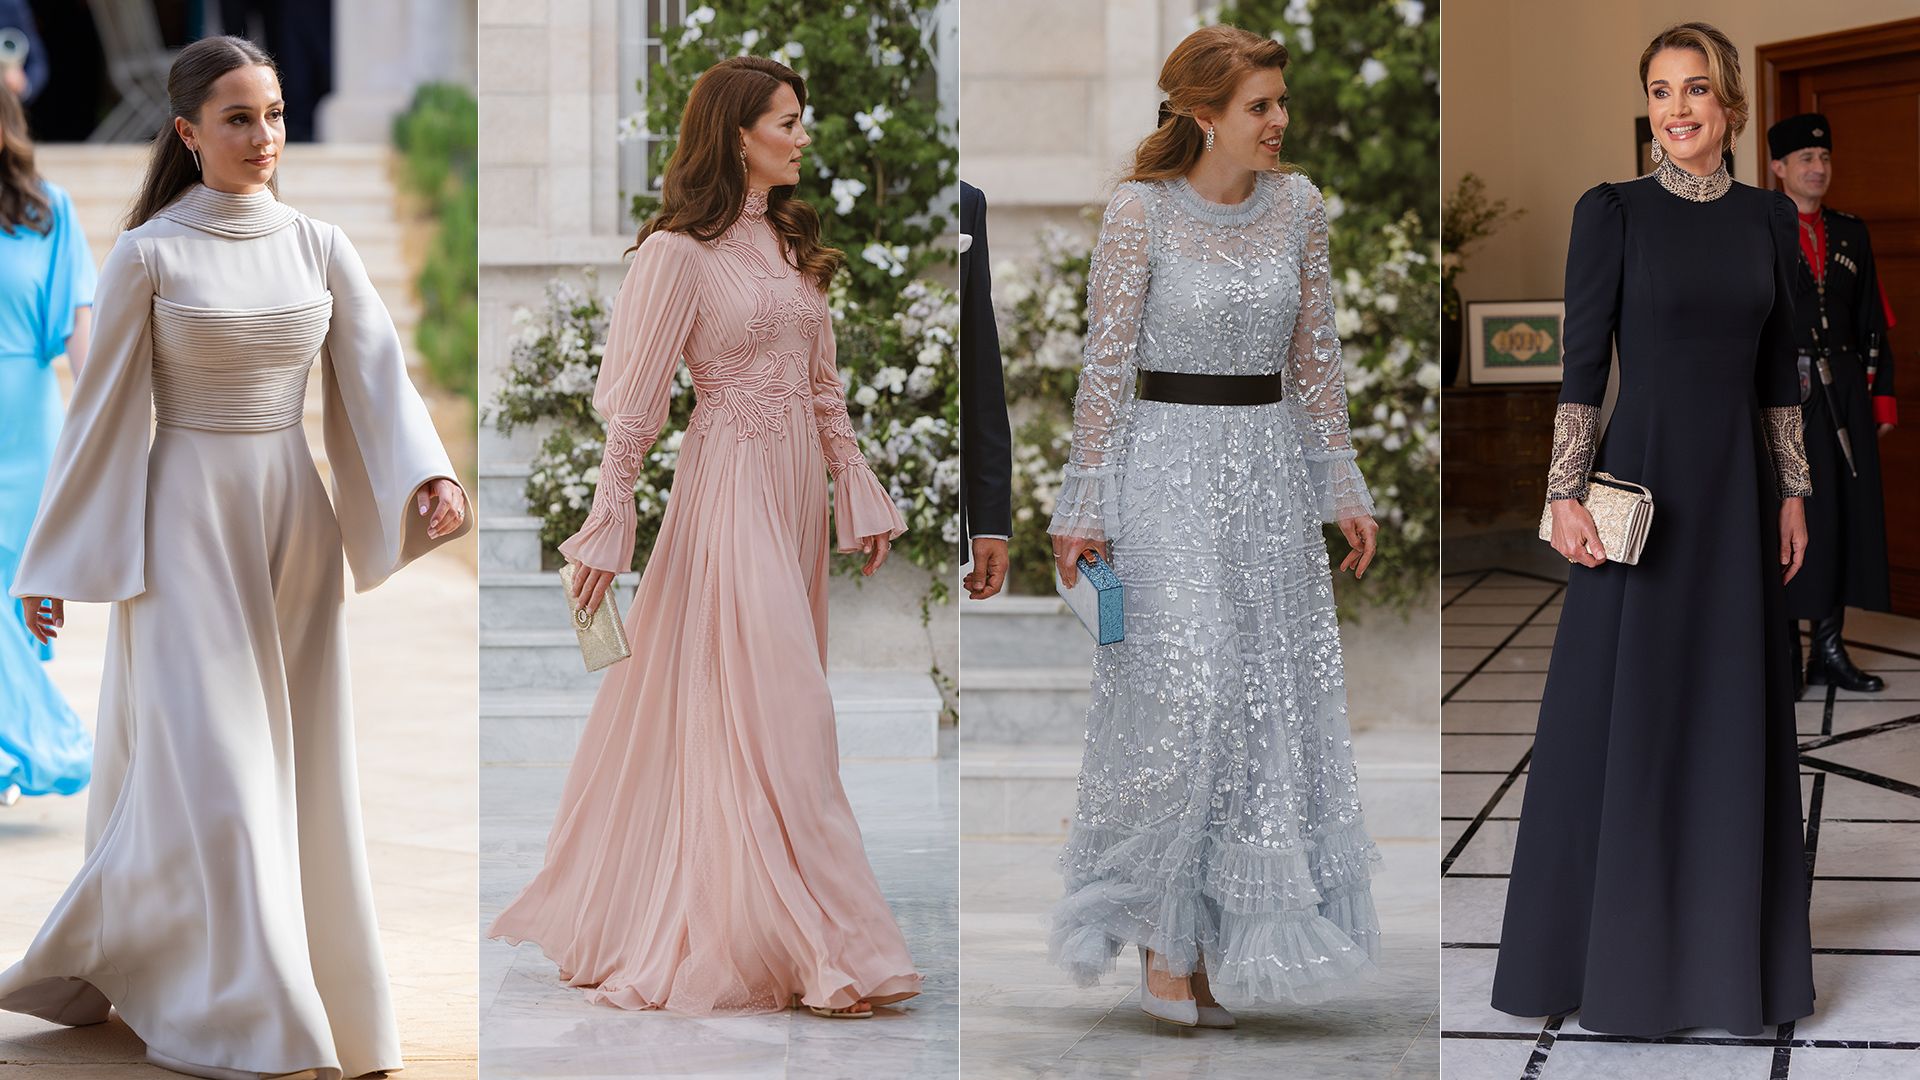 Royal Style Watch: From Princess Kate’s pink gown to Princess Beatrice's rare tiara